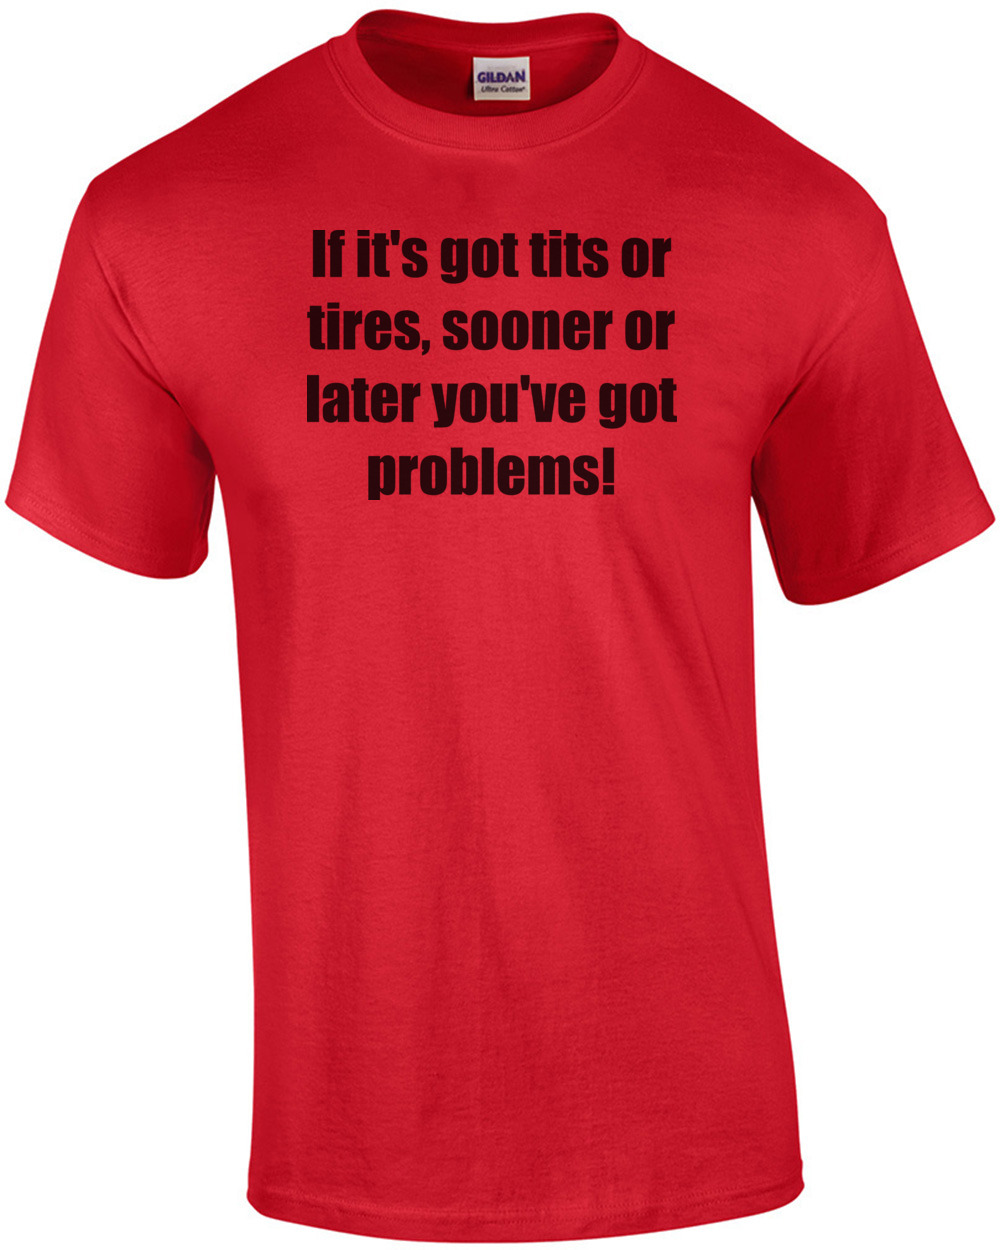 If it's got tits or tires, sooner or later you've got problems! Shirt